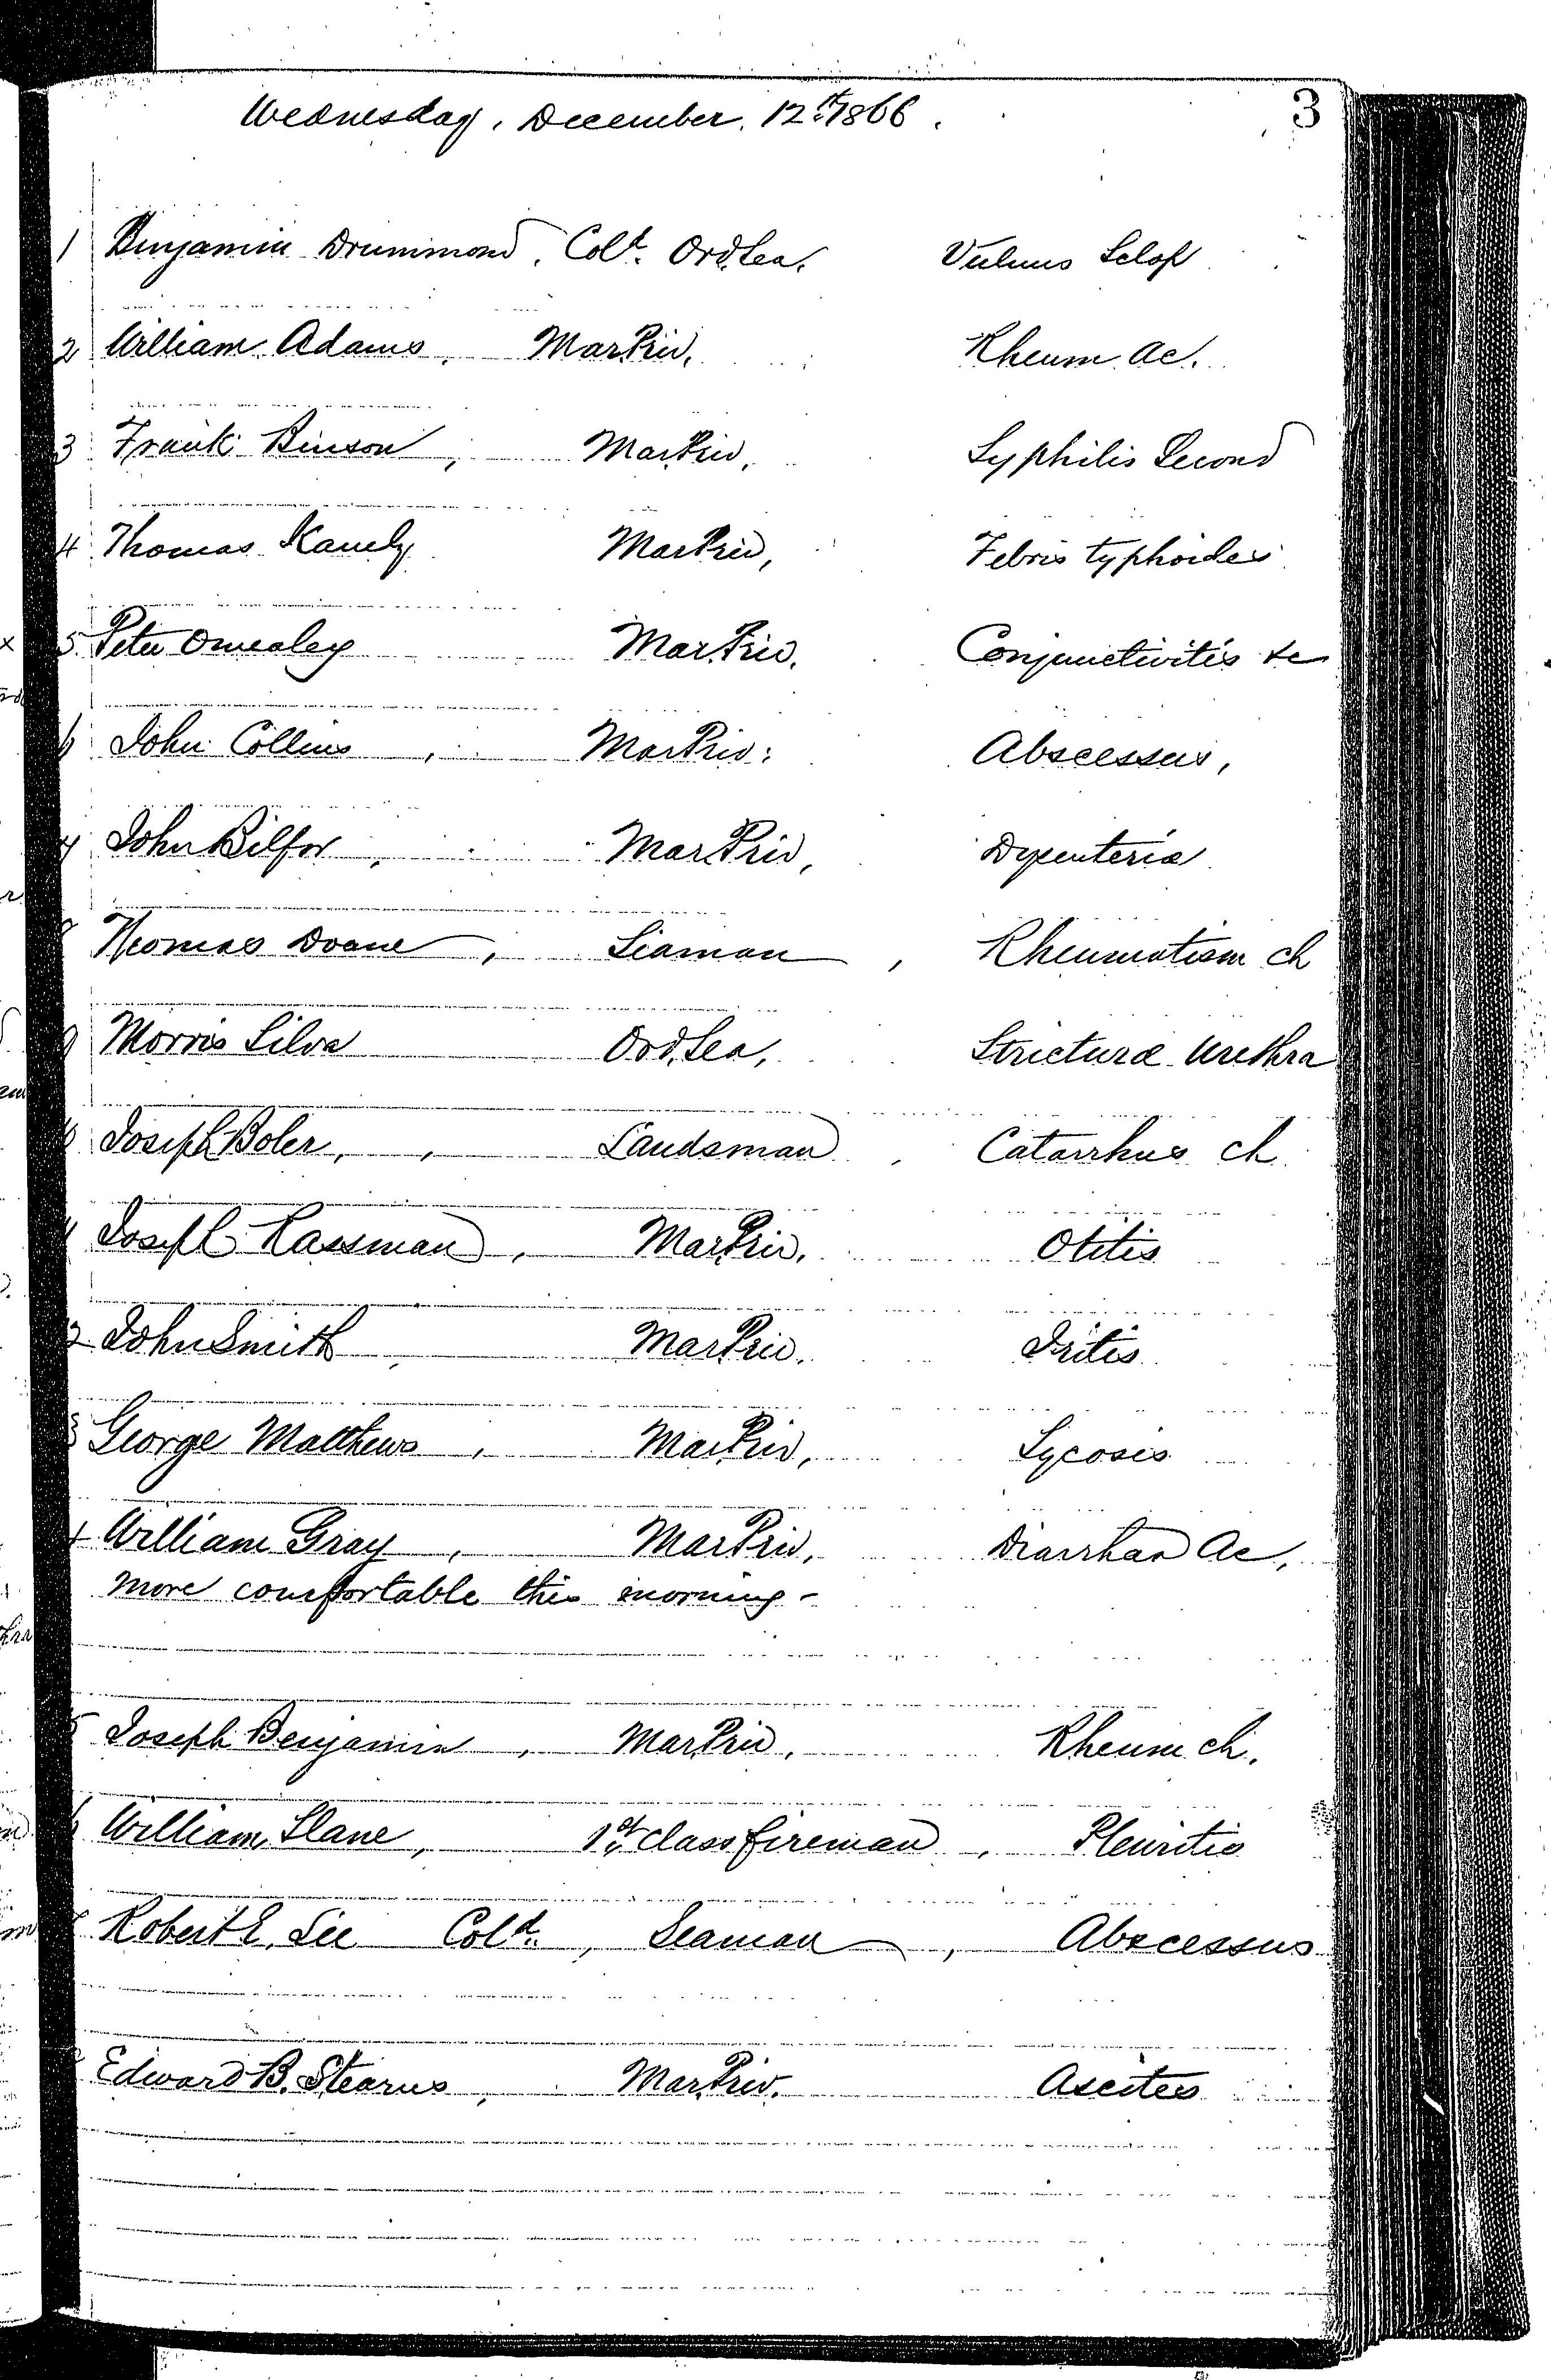 Patients in the Naval Hospital, Washington DC, on December 12, 1866, page 1 of 2, in the Medical Journal, October 1, 1866 to March 20, 1867